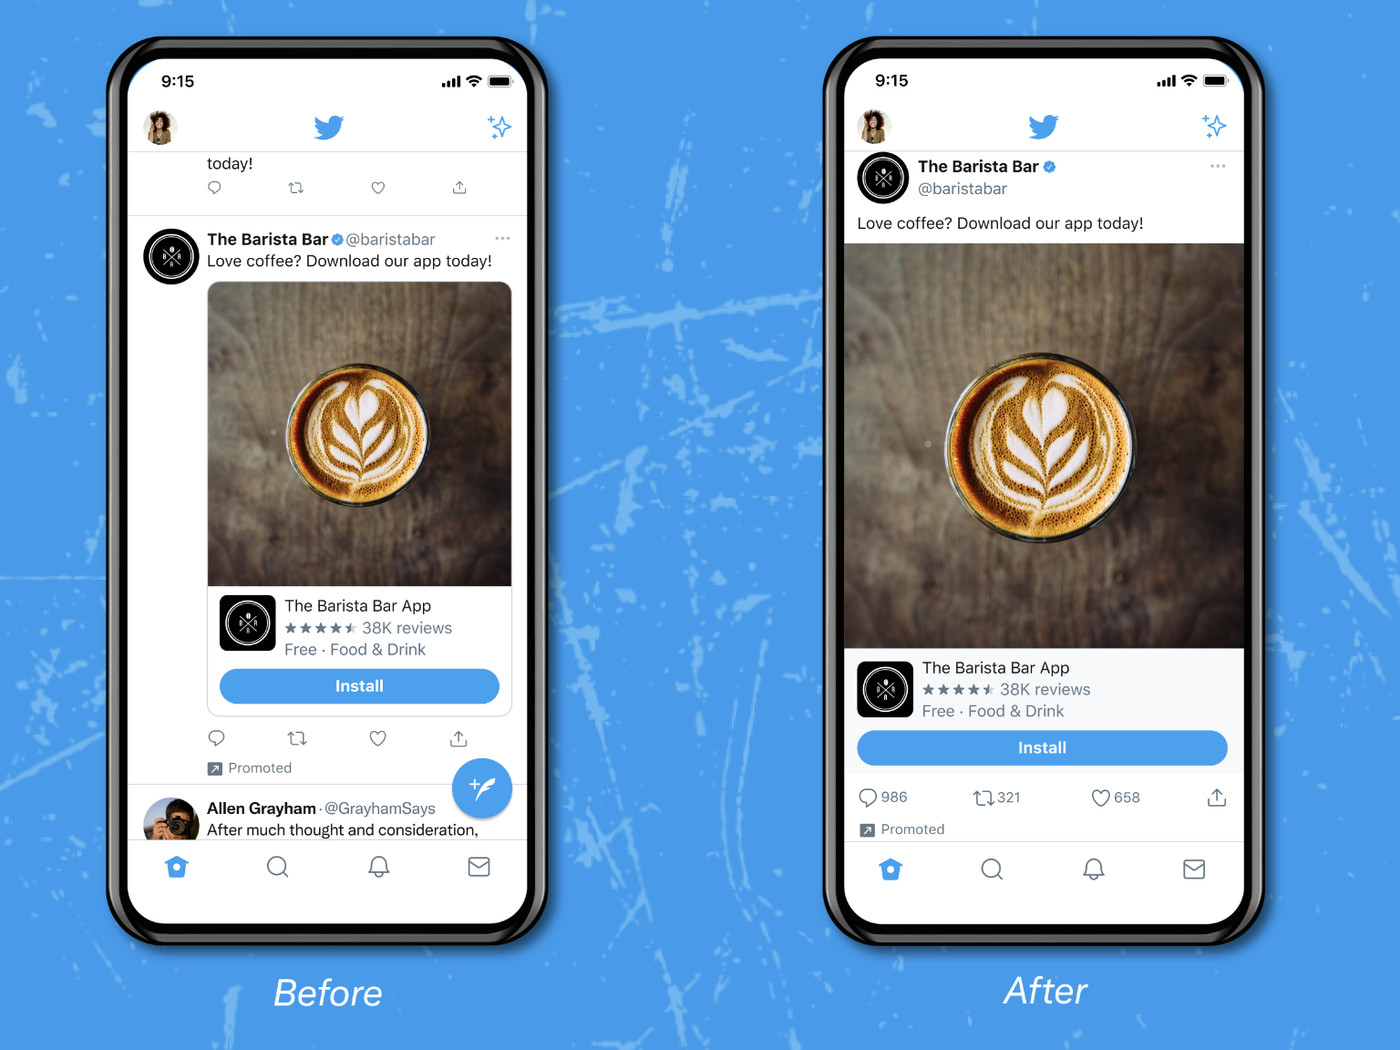 Twitter Is Testing New Edge-To-Edge Design For The Timeline